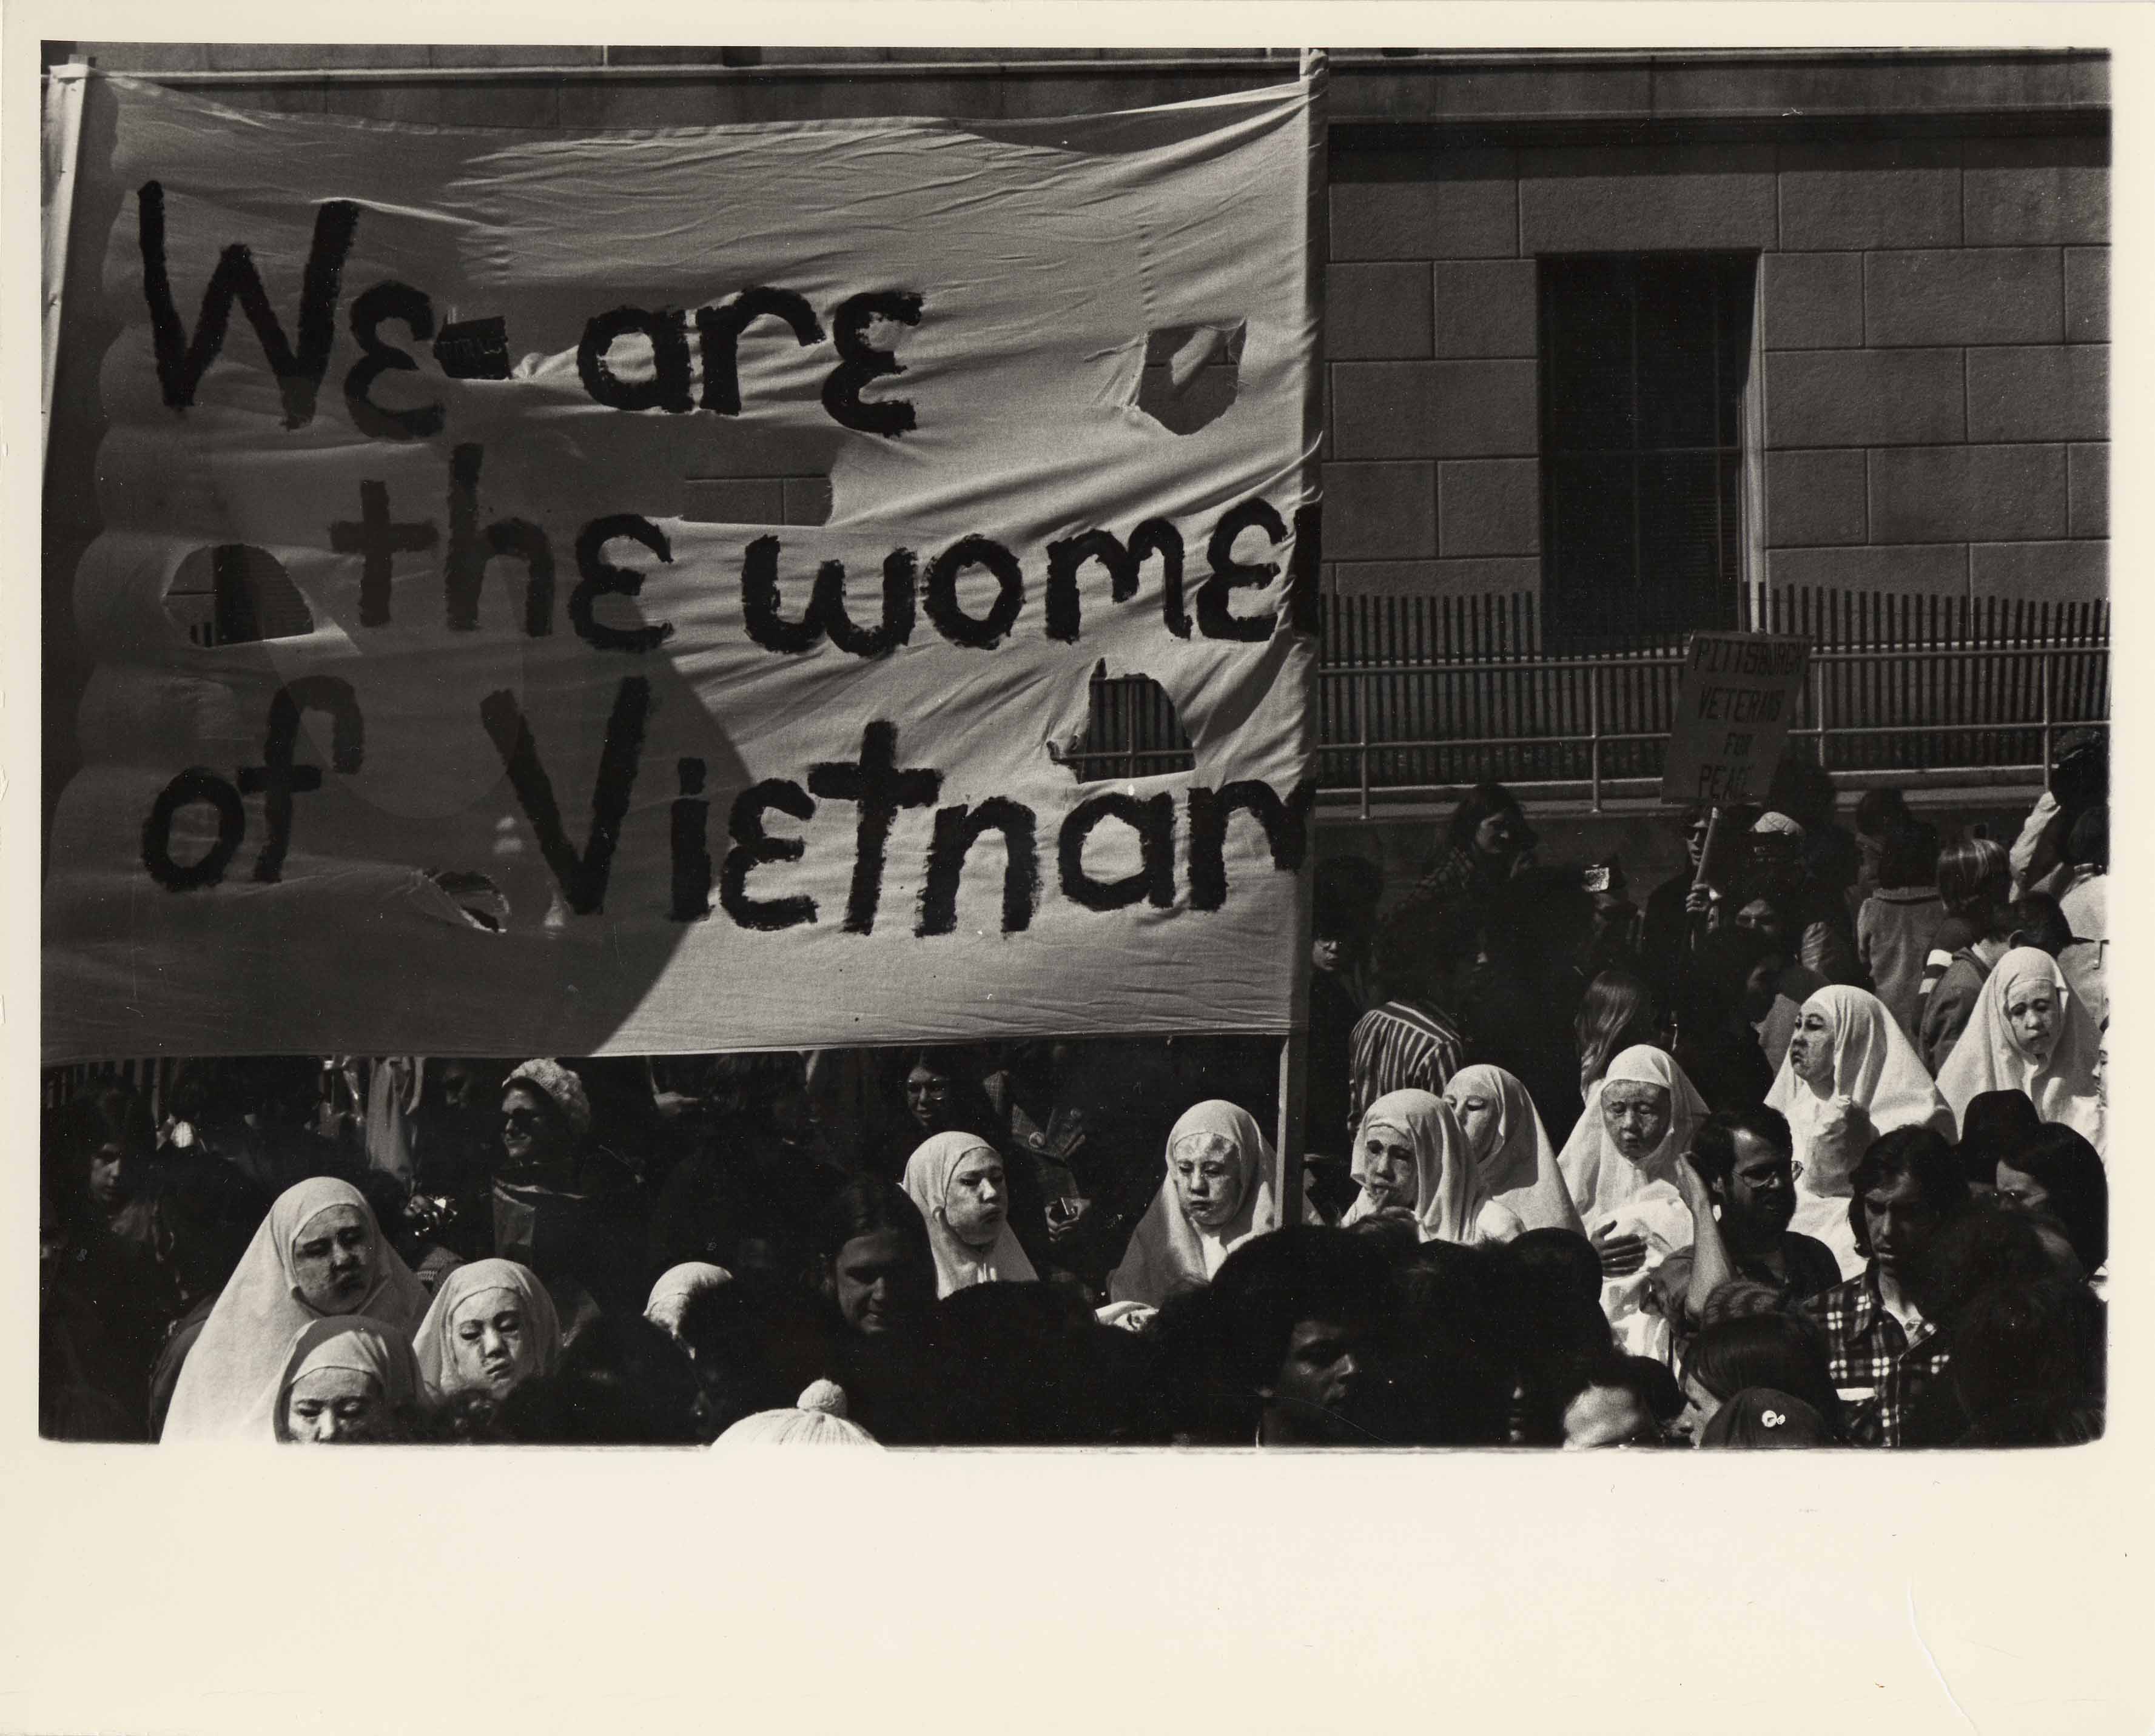 peace marches during vietnam war